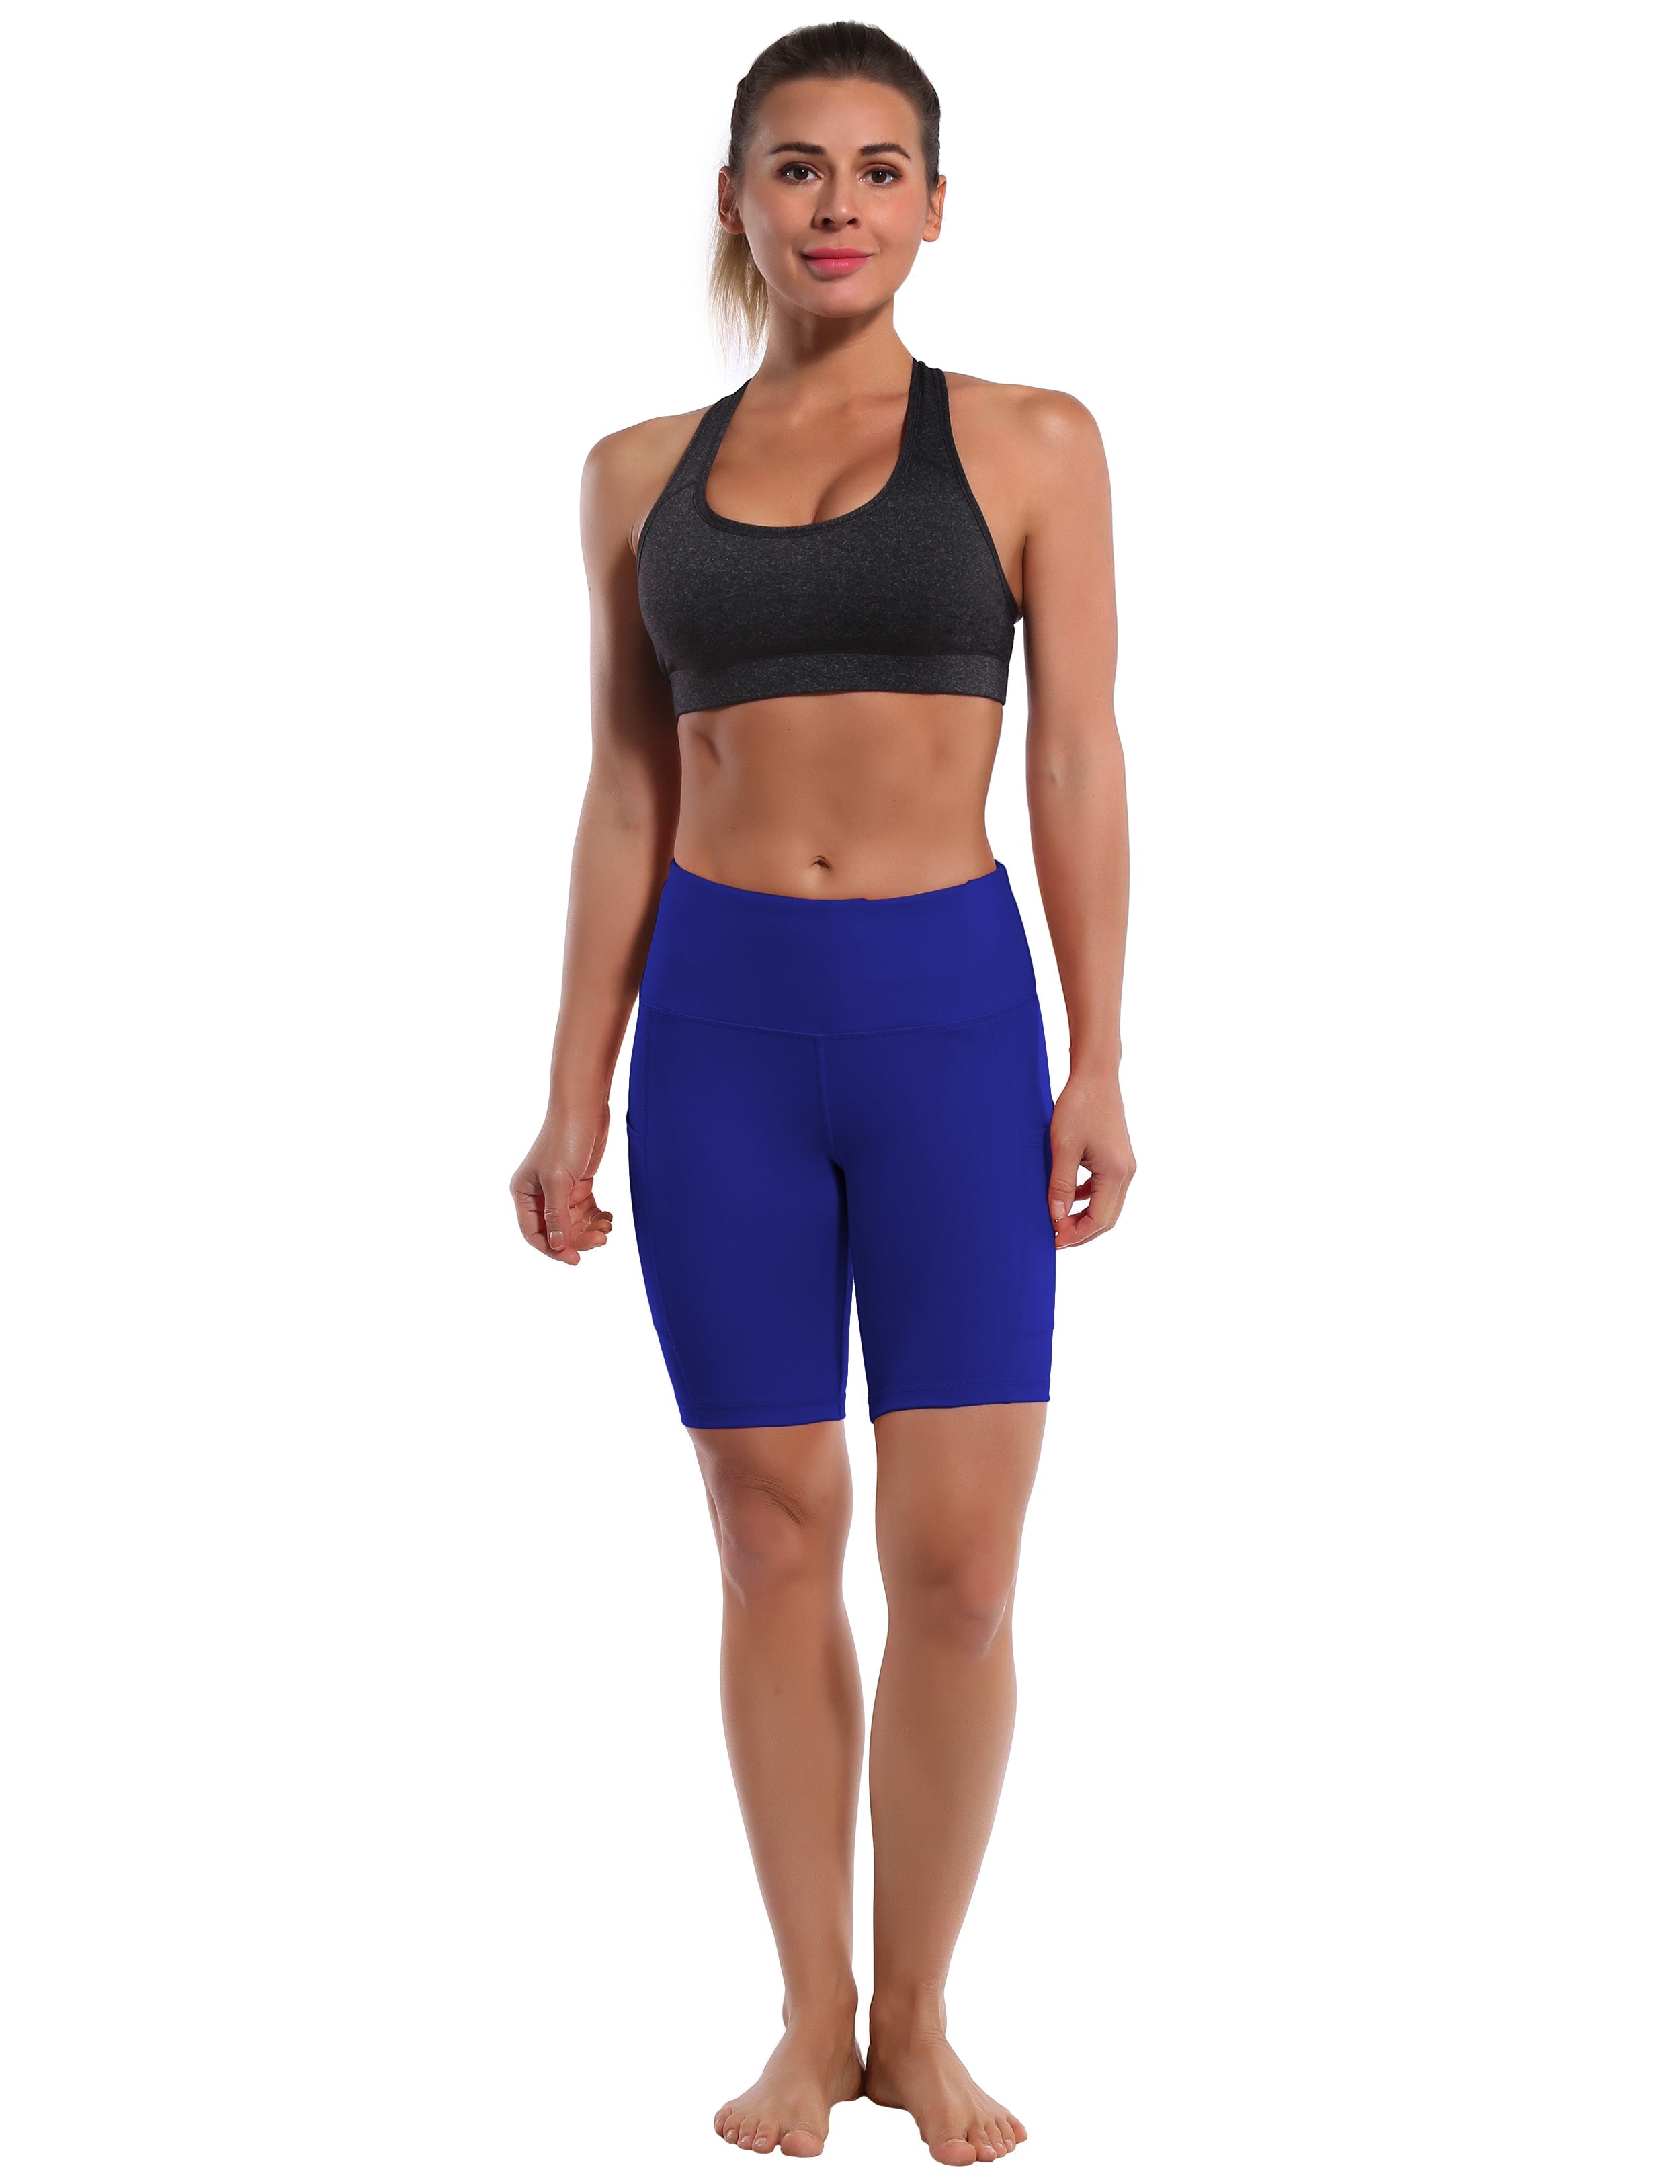 8" Side Pockets Biking Shorts navy Sleek, soft, smooth and totally comfortable: our newest style is here. Softest-ever fabric High elasticity High density 4-way stretch Fabric doesn't attract lint easily No see-through Moisture-wicking Machine wash 75% Nylon, 25% Spandex